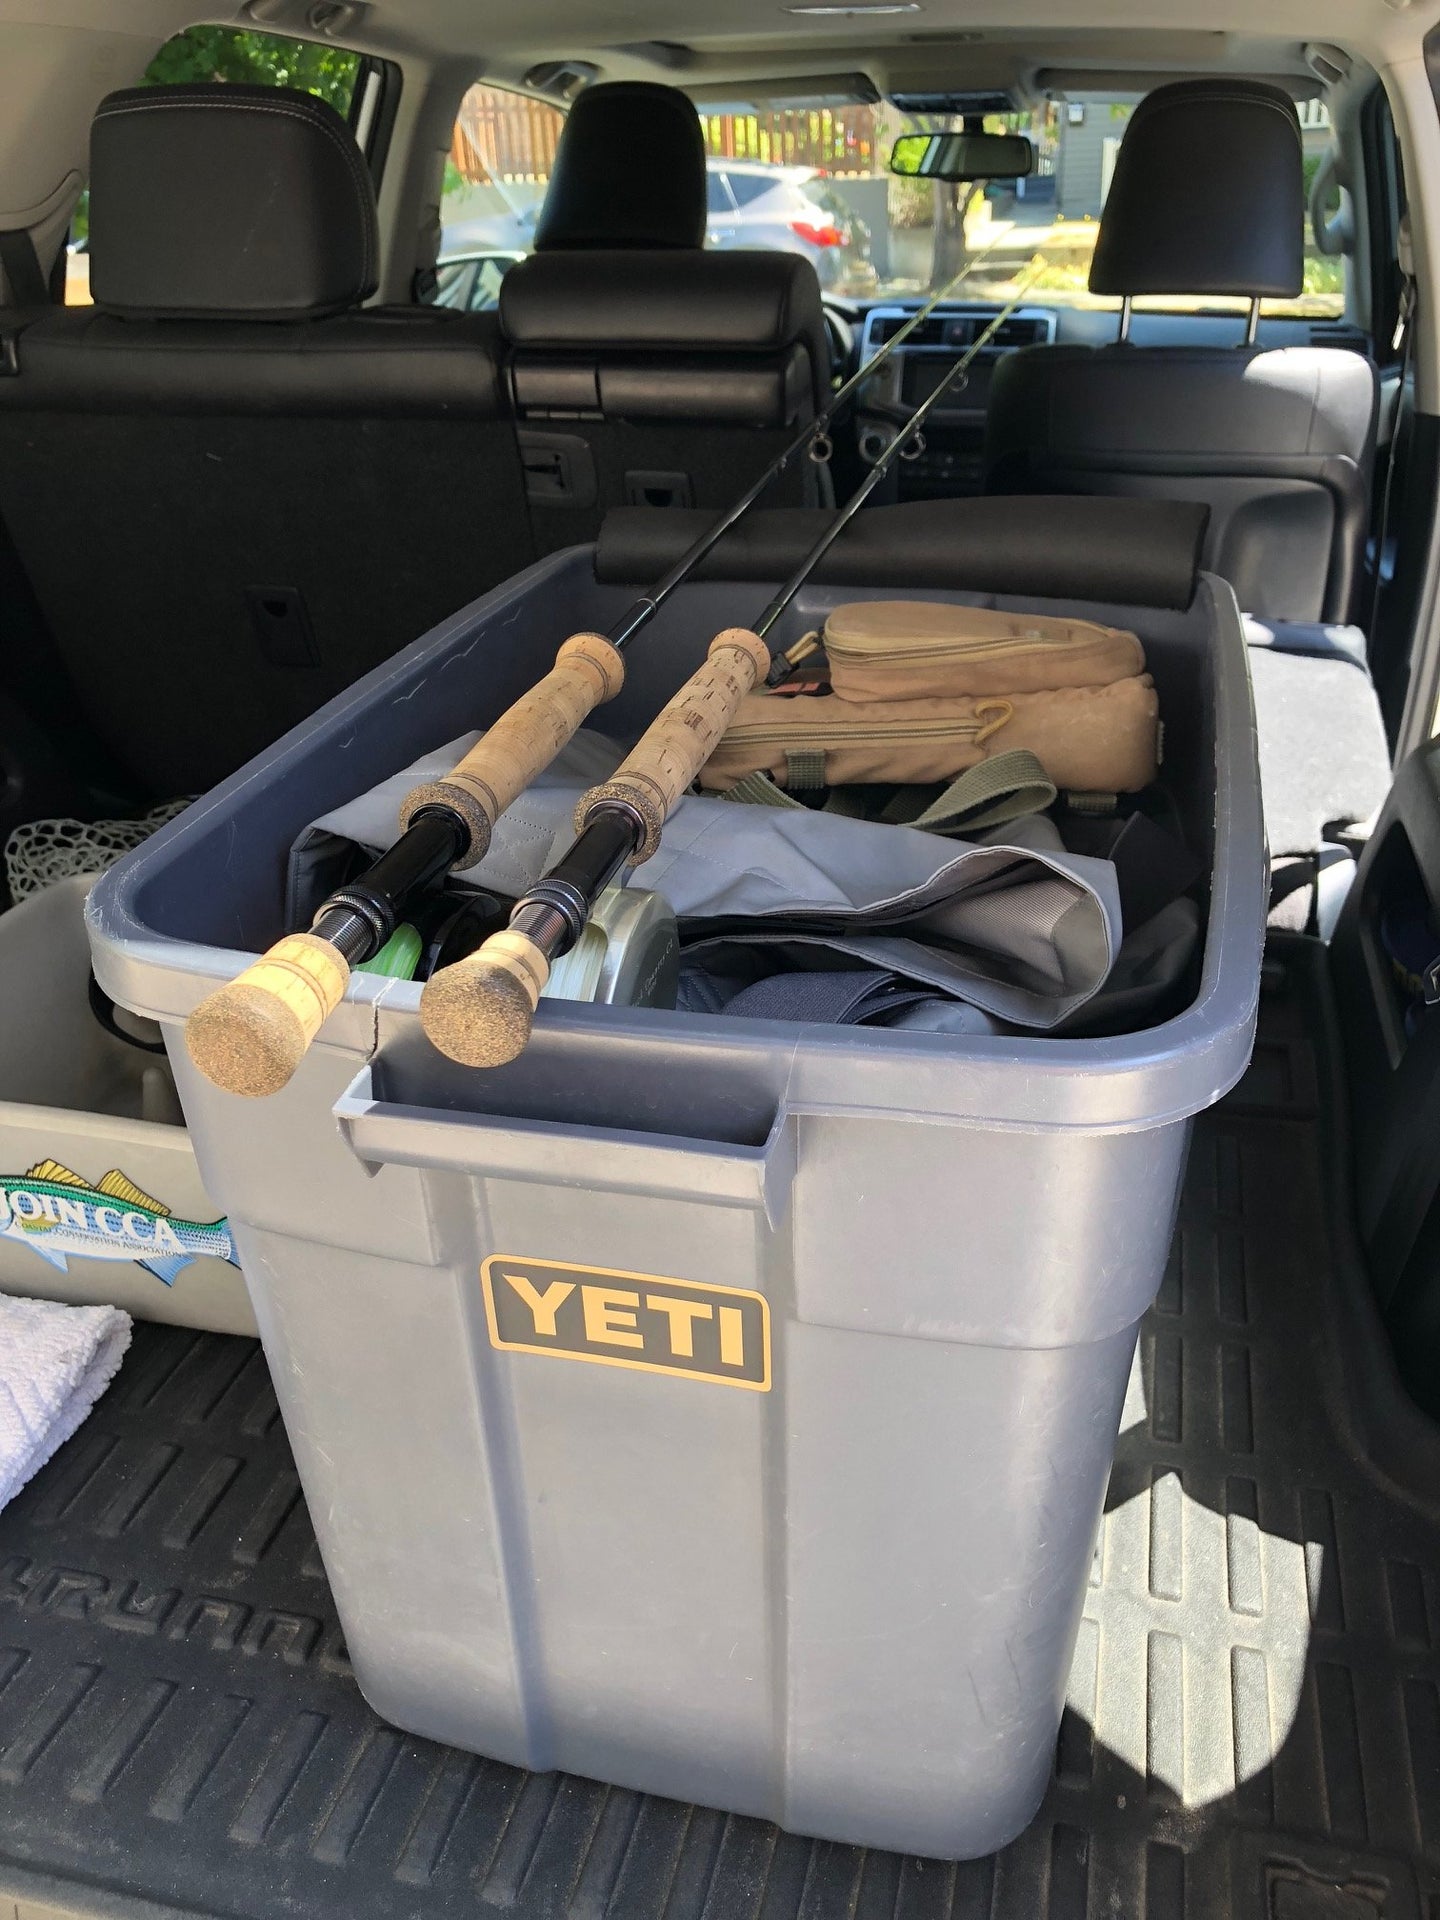 Smith Creek Rod Rack For Vehicle Interior — The Flyfisher